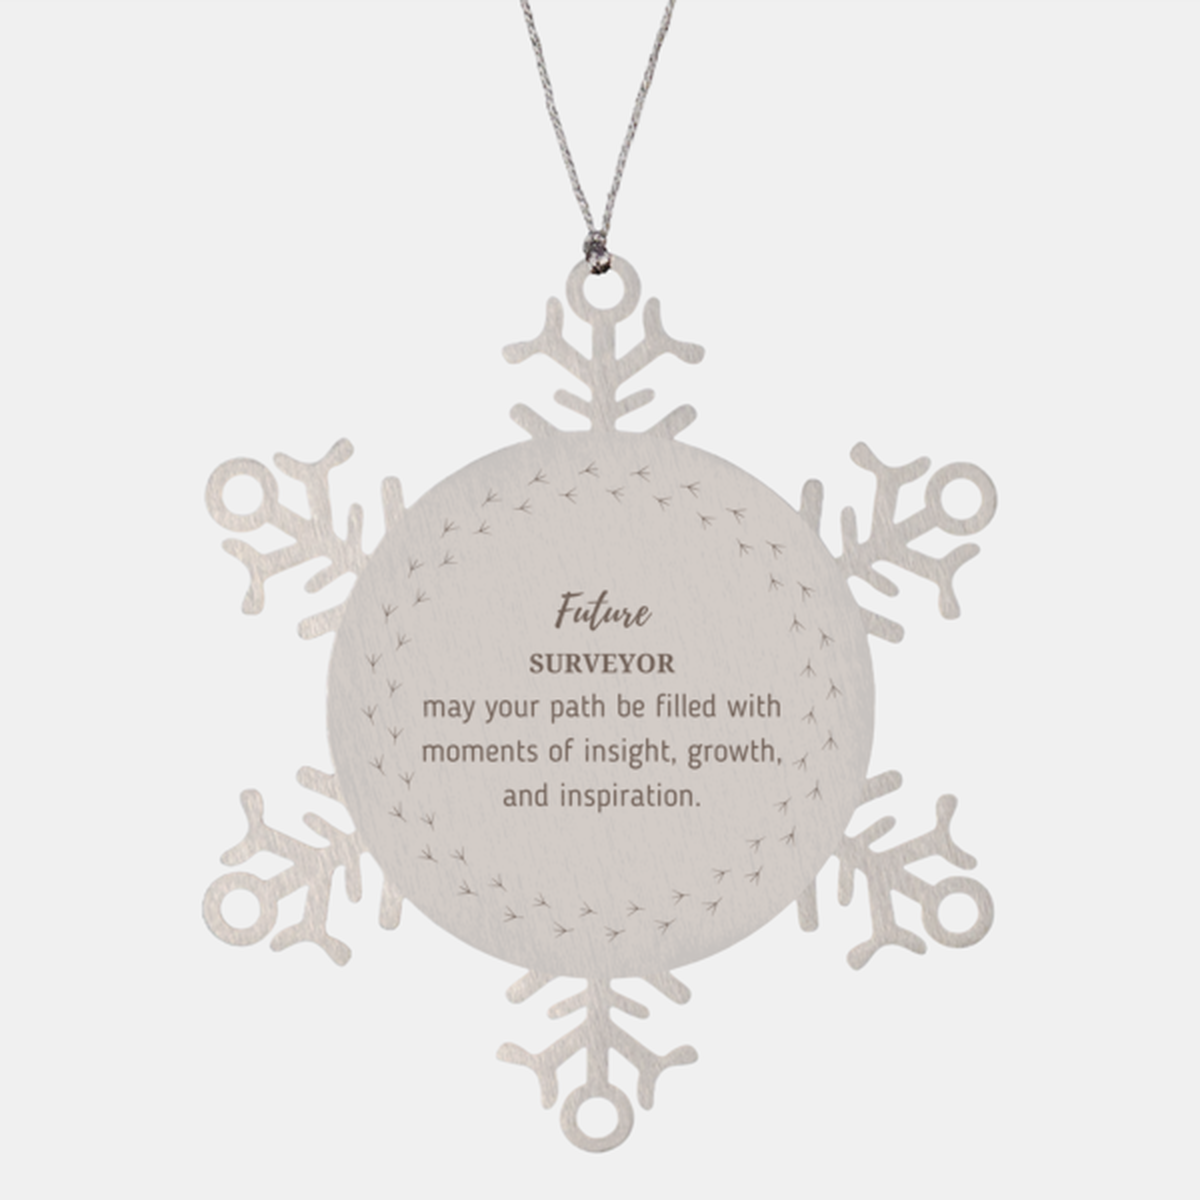 Future Surveyor Gifts, May your path be filled with moments of insight, Graduation Gifts for New Surveyor, Christmas Unique Snowflake Ornament For Men, Women, Friends